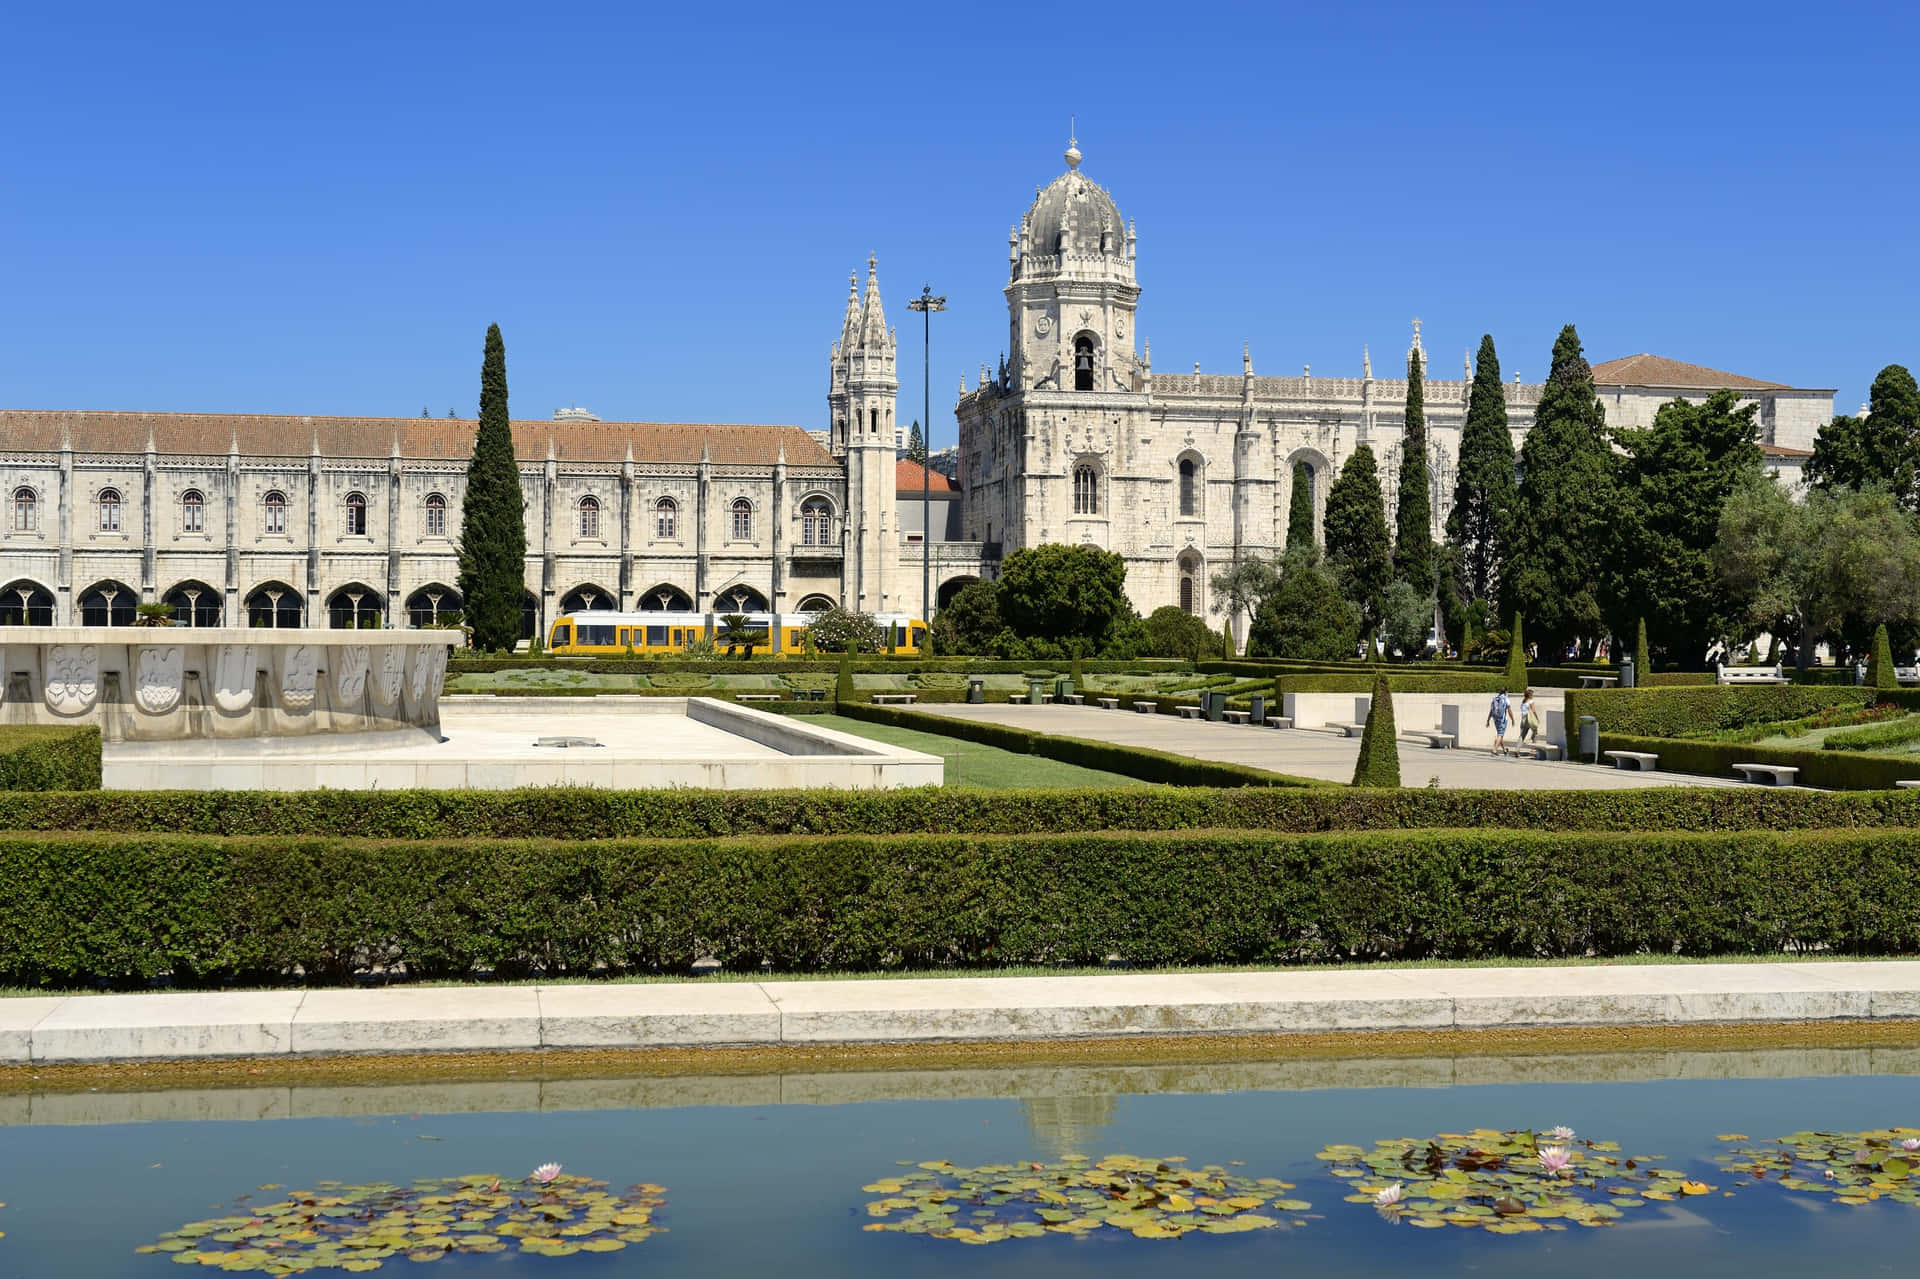 Beautiful reflection of Mosteiro Dos Jeronimos in a serene pond. Wallpaper